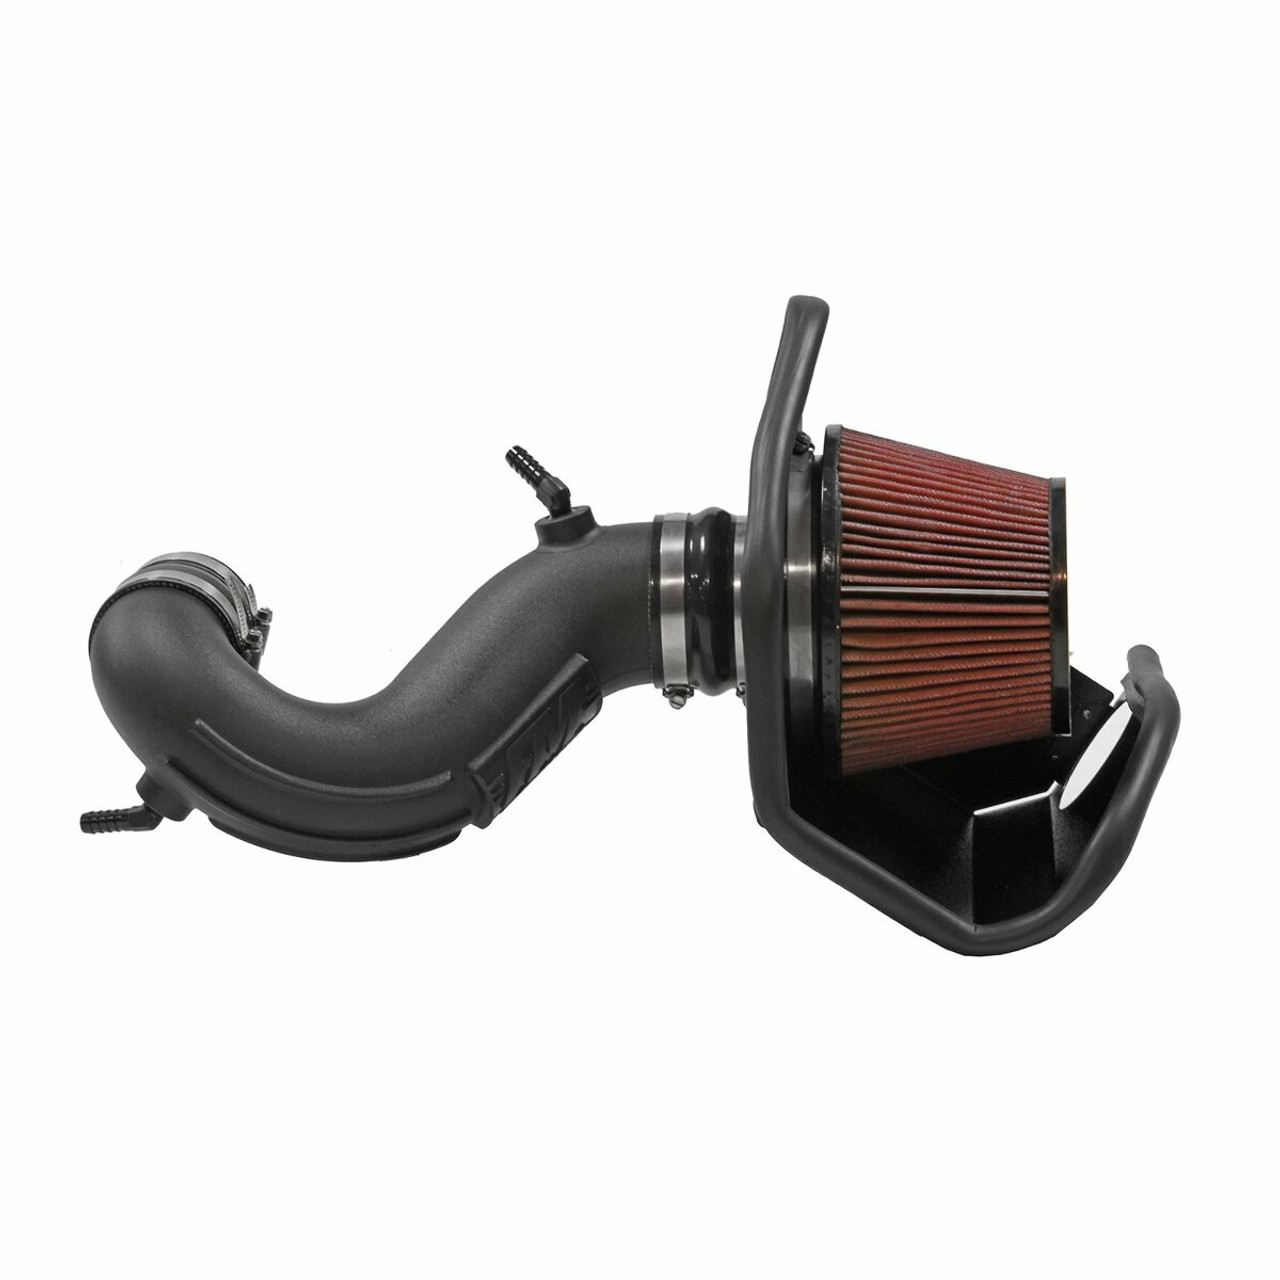 Flowmaster Delta Force Air Intake fits 91-95 Jeep Wrangler YJ 4.0 615211  Performance-Curve